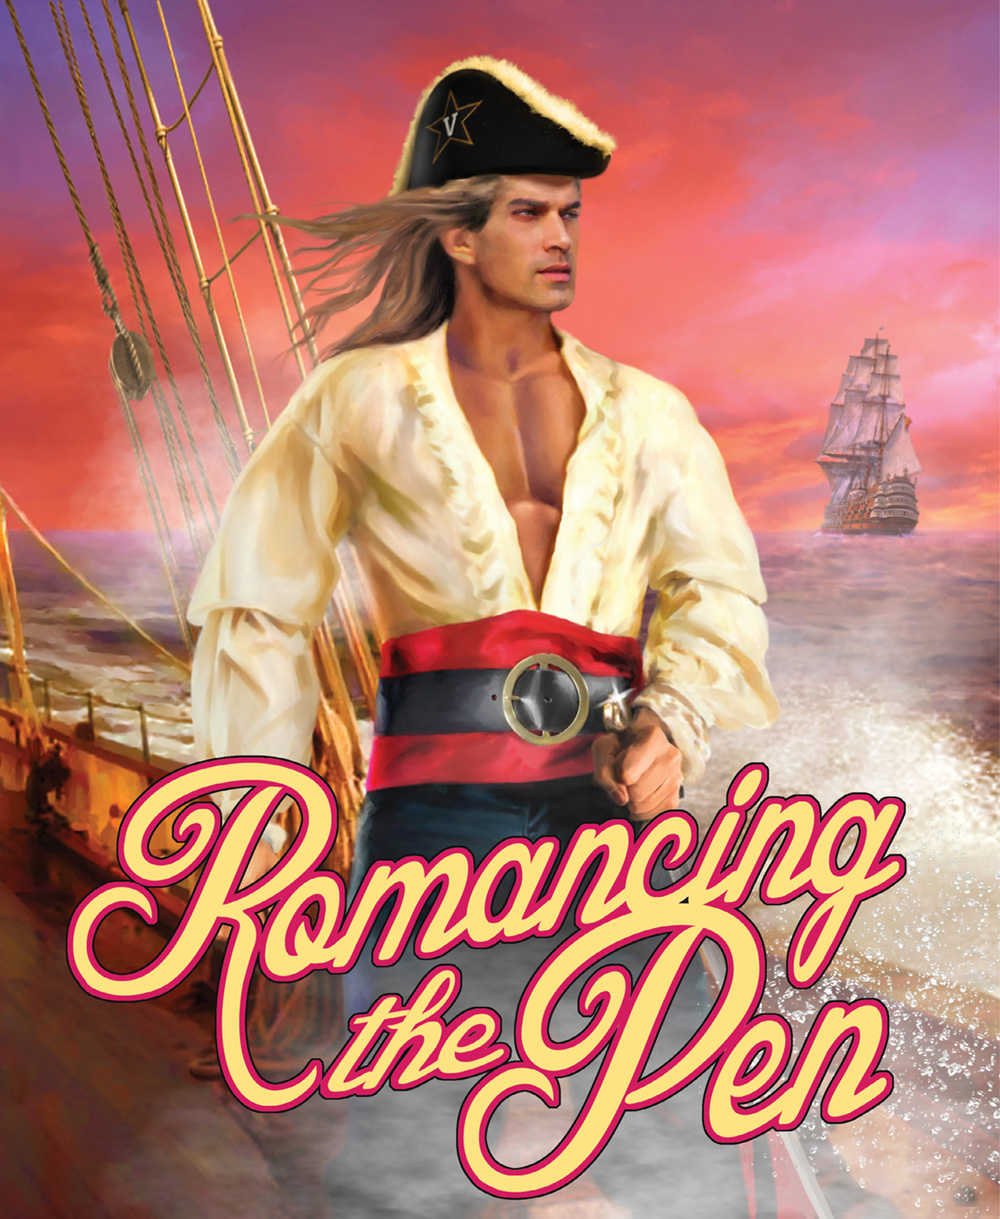 illustration of a stereotypical male protagonist from a romance book cover, who's on board a ship and wearing a Commodore hat